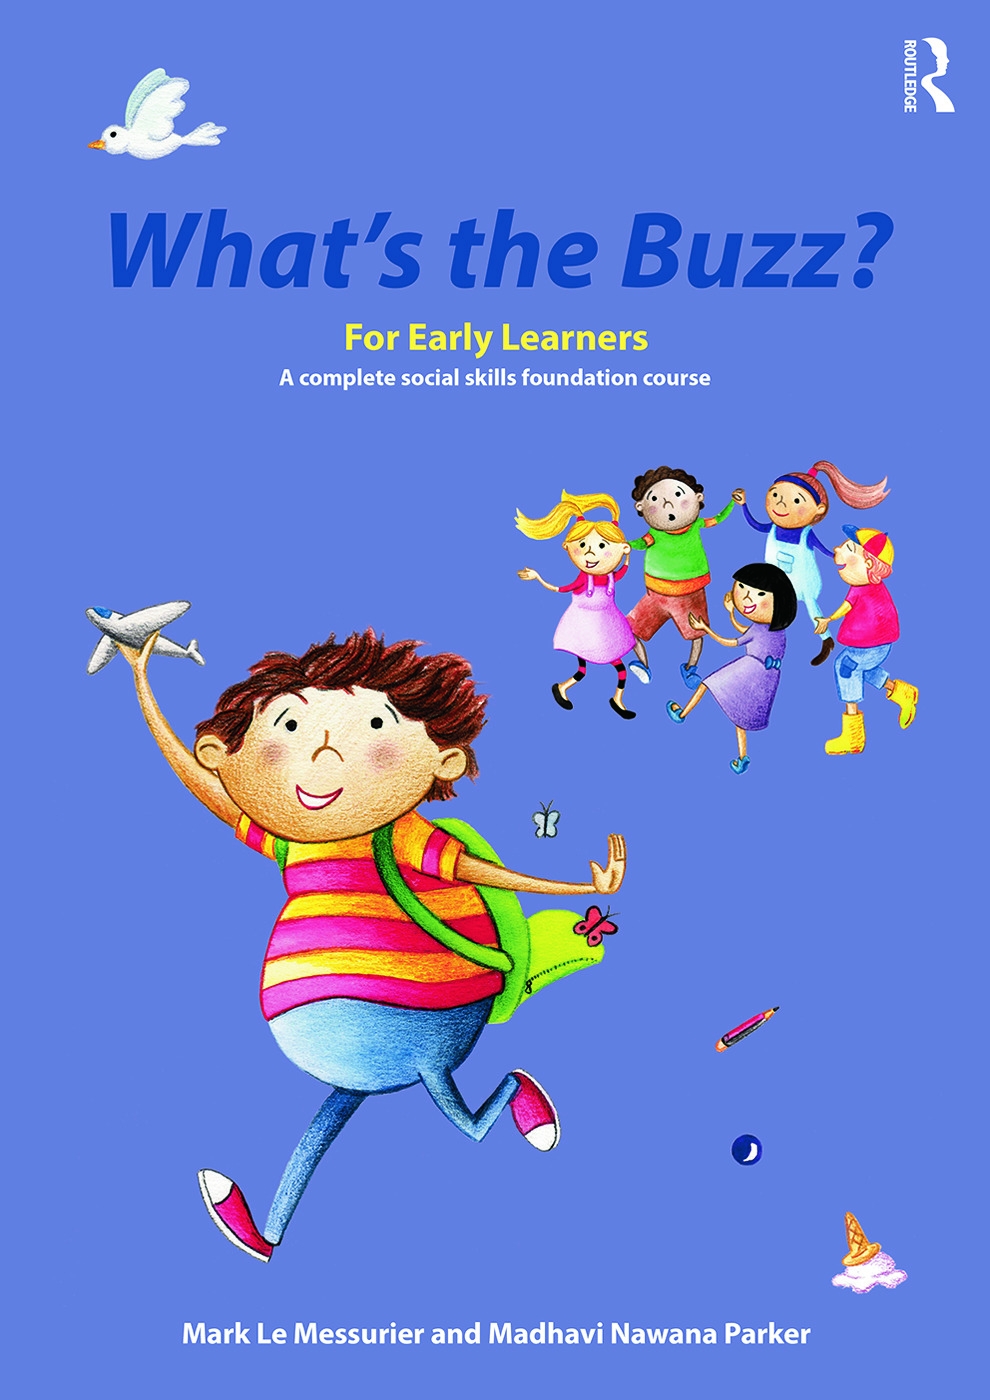 What’s the Buzz? for Early Learners: A Complete Social Skills Foundation Course